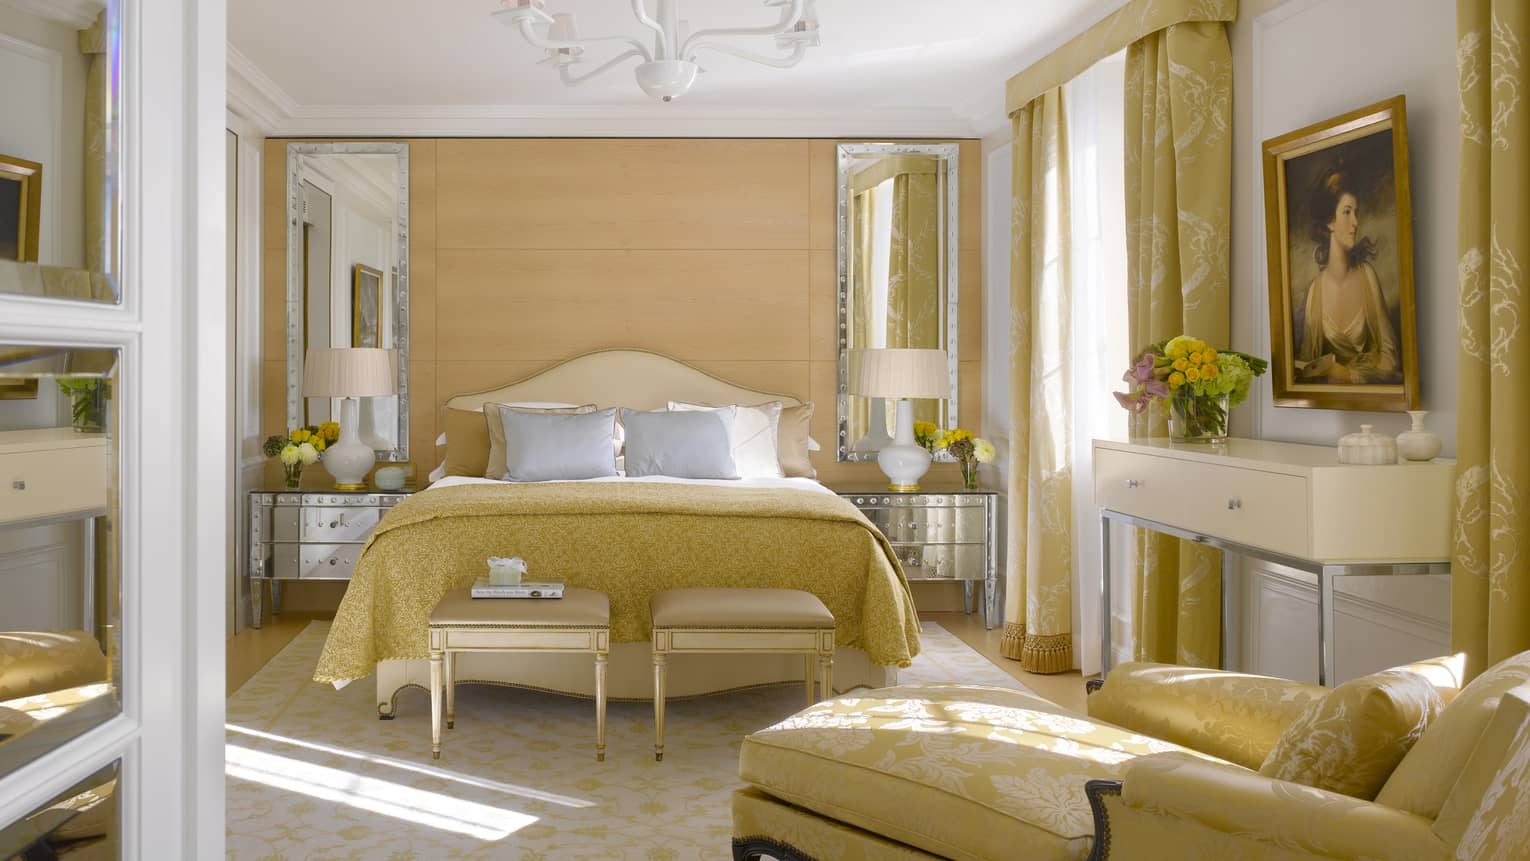 Presidential suite with queen bed, chaise lounge, and gold Victorian accents